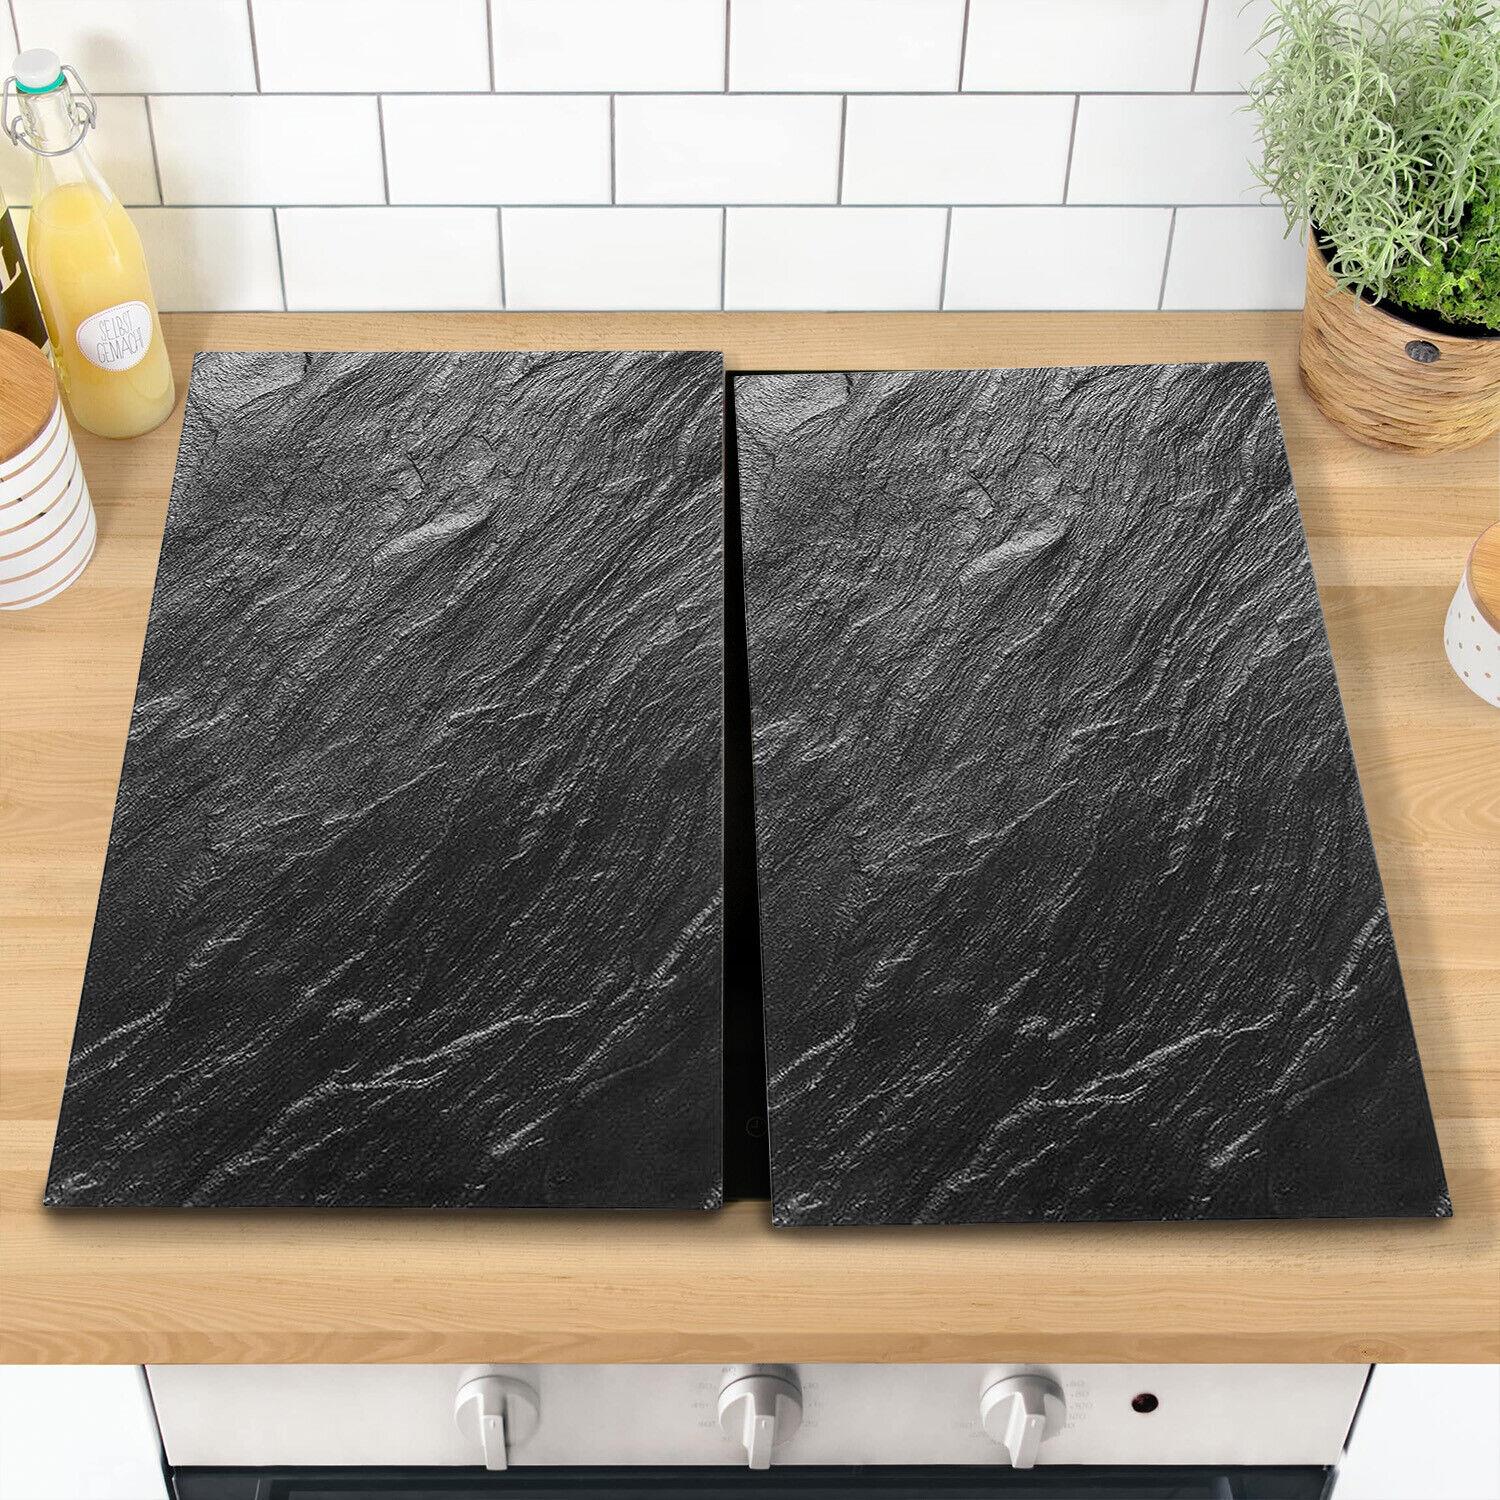 Stone Effect Glass Cutting Boards by Geezy - The Magic Toy Shop